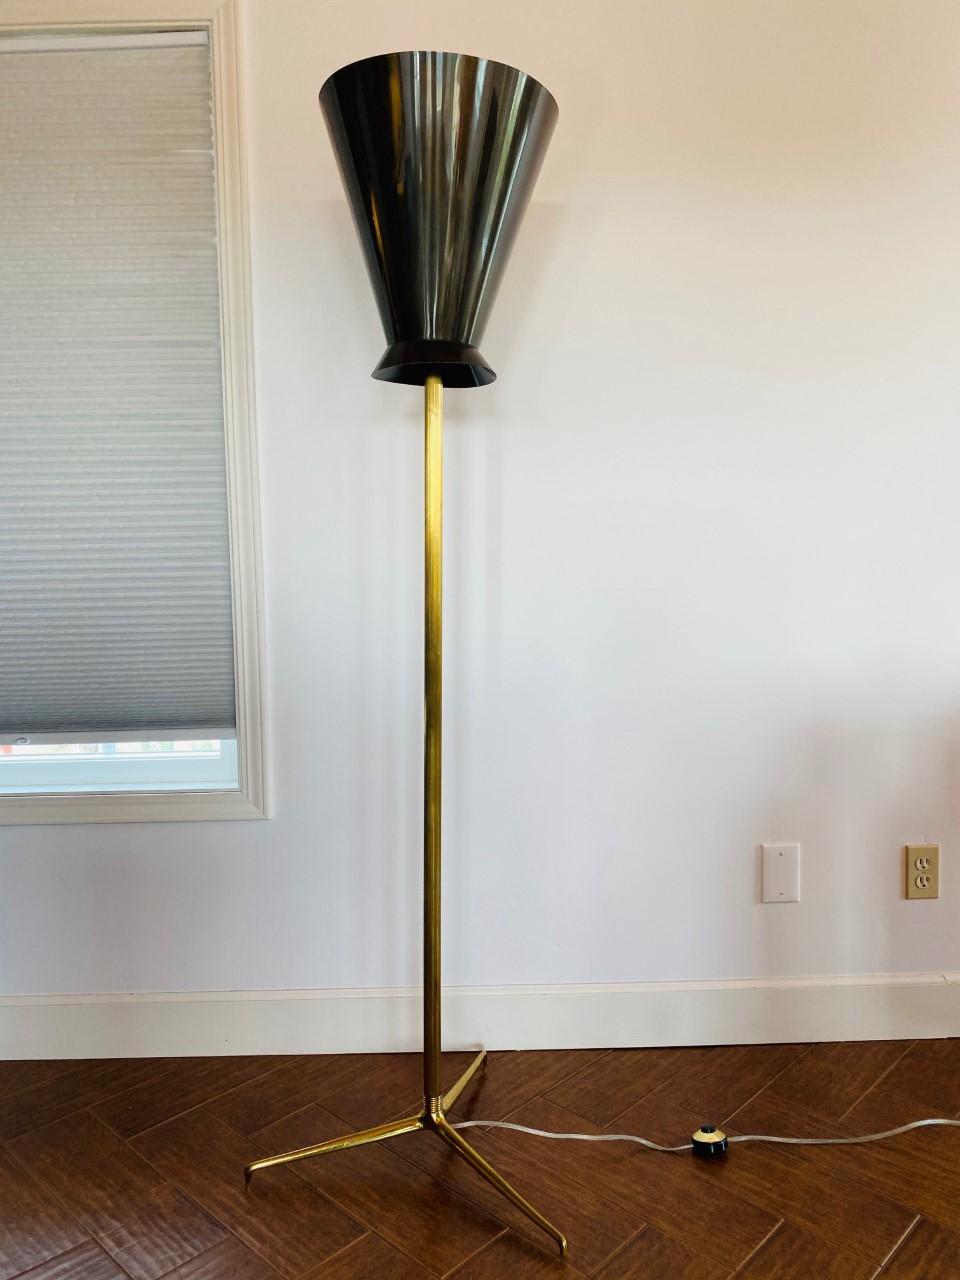 Floor lamp in the style of Karl Springer for Stiffel. This pieces exudes mid century glamour and style. The chic simple lines have impact and weight. The conical metal laminated shade is sculptural and adds weightless drama as it stems on a patina